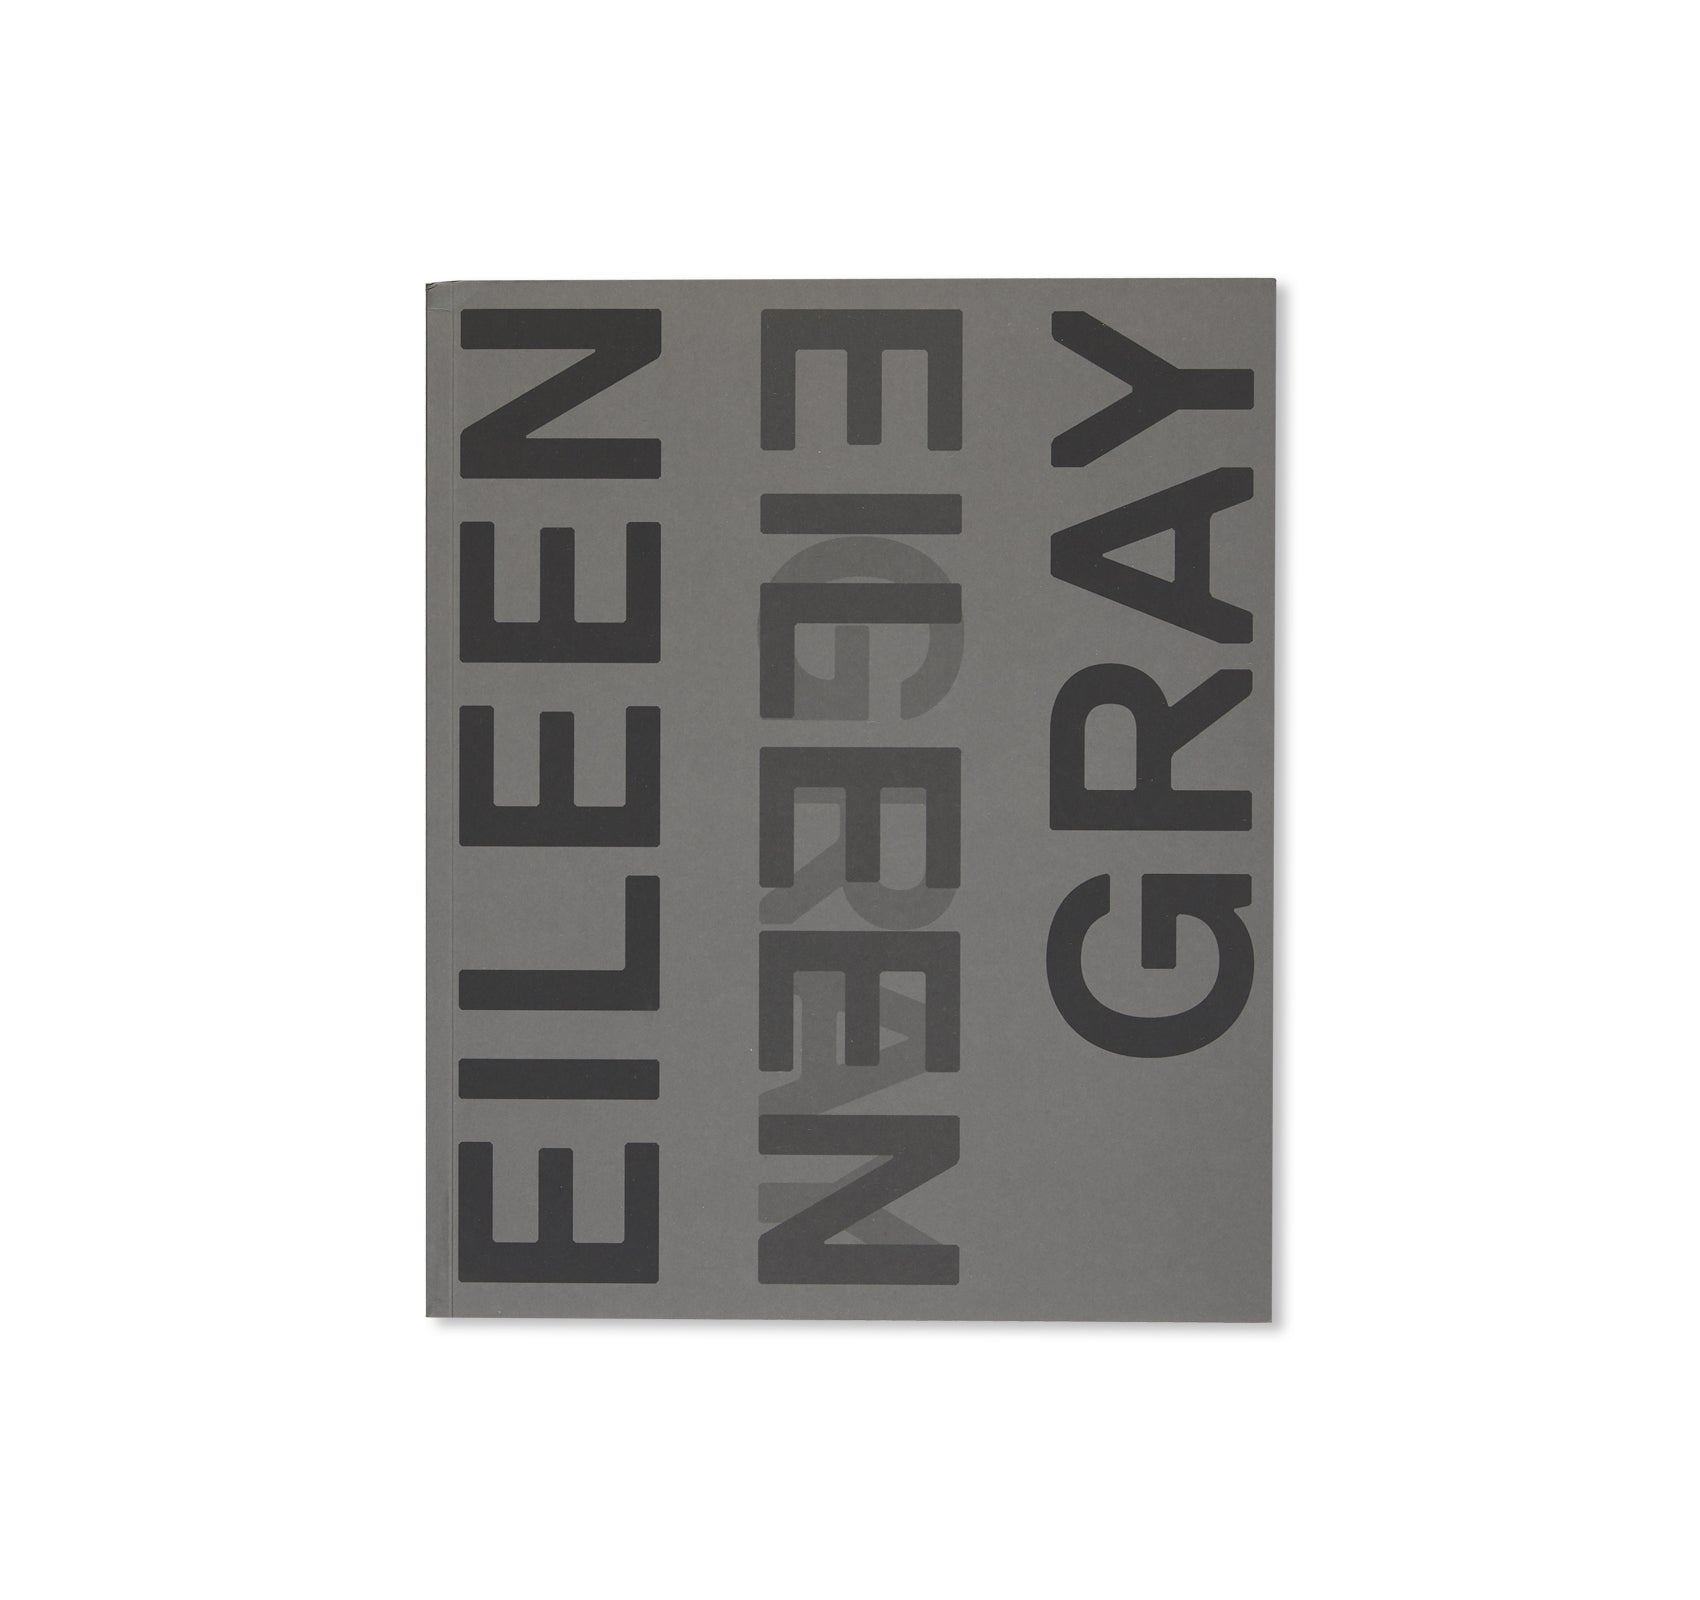 EILEEN GRAY, DESIGNER AND ARCHITECT by Eileen Gray